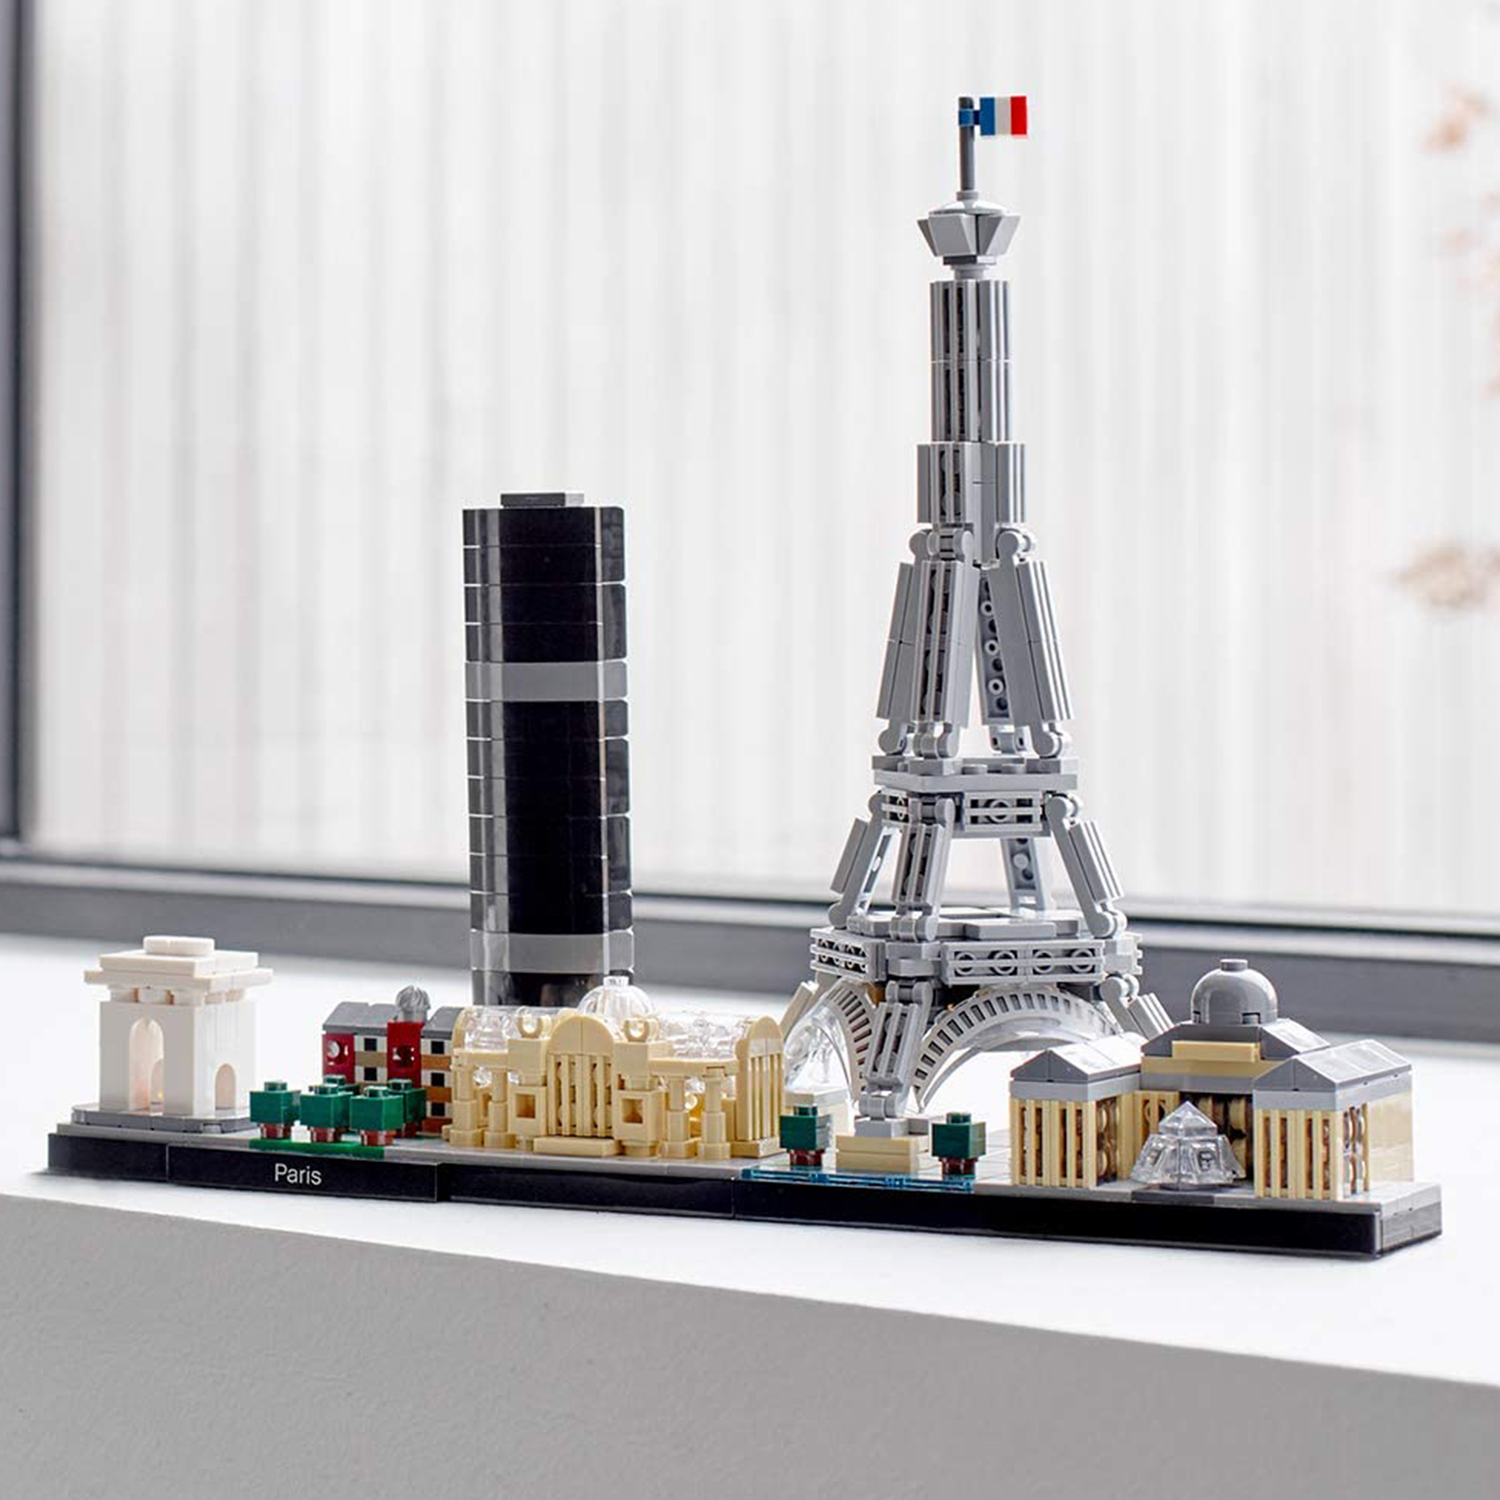 LEGO Architecture Paris Skyline, Collectible Model Building Kit with Eiffel Tower and The Louvre, Skyline Collection, Office Home Décor, Unique Gift to Unleash any Adult's Creativity, 21044 - image 3 of 6